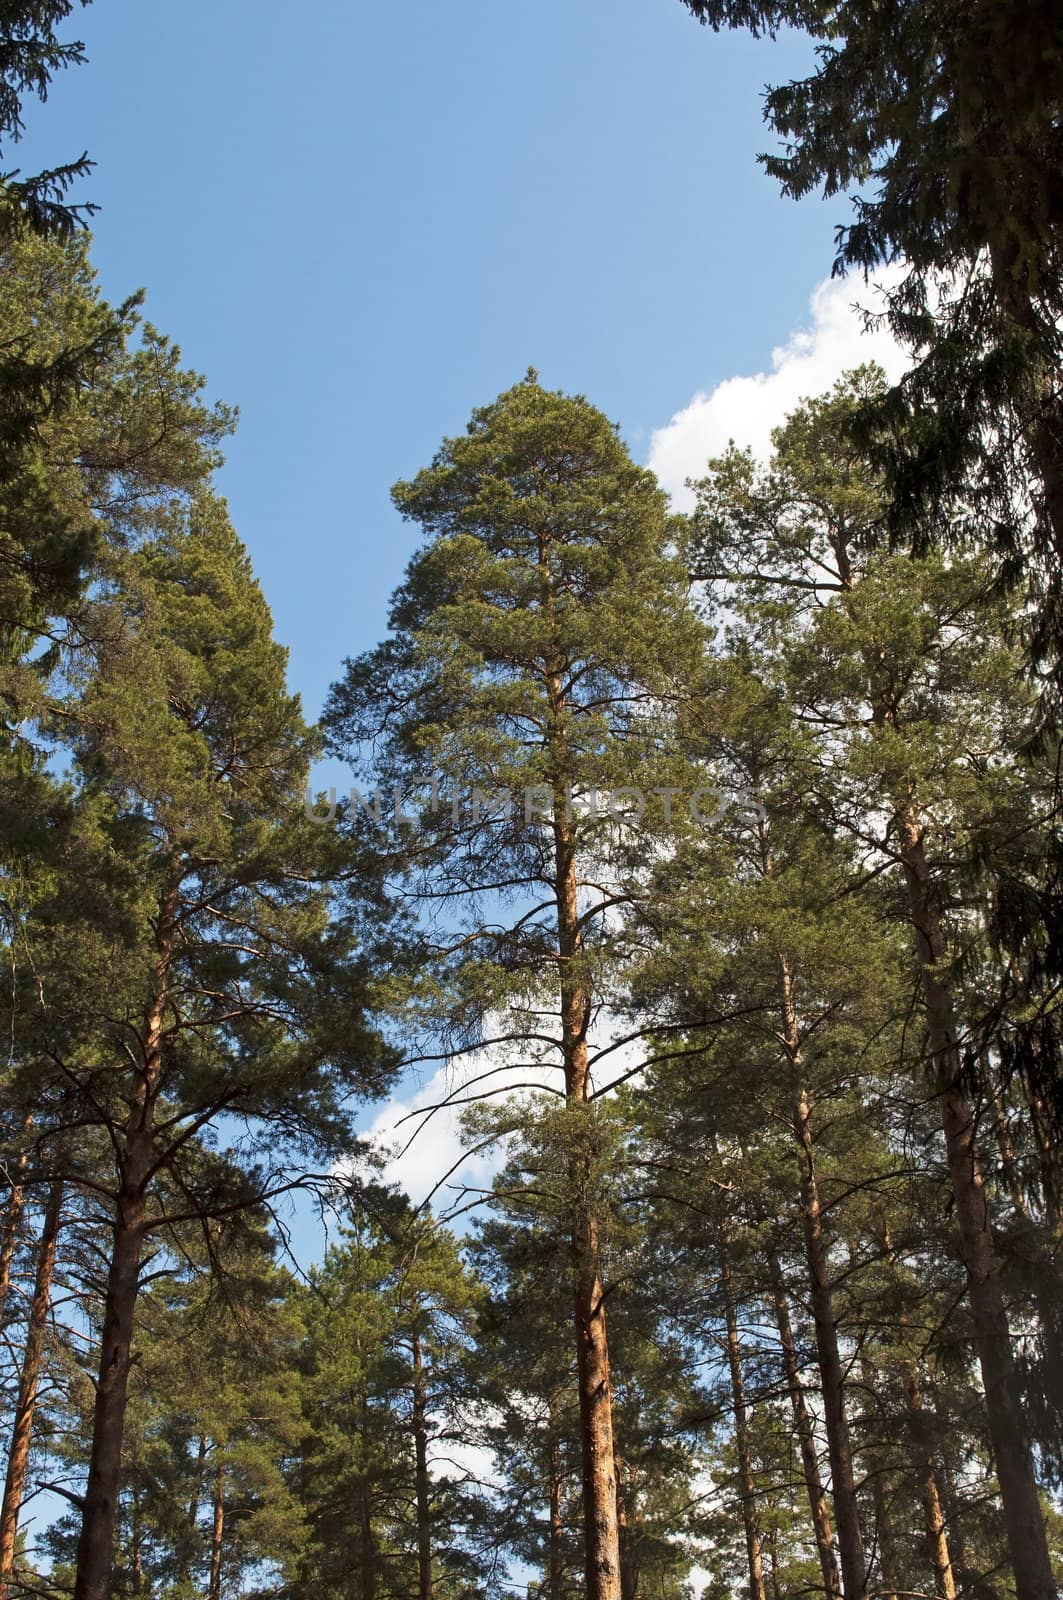 The trunks of the pines against the blue sky in the forest